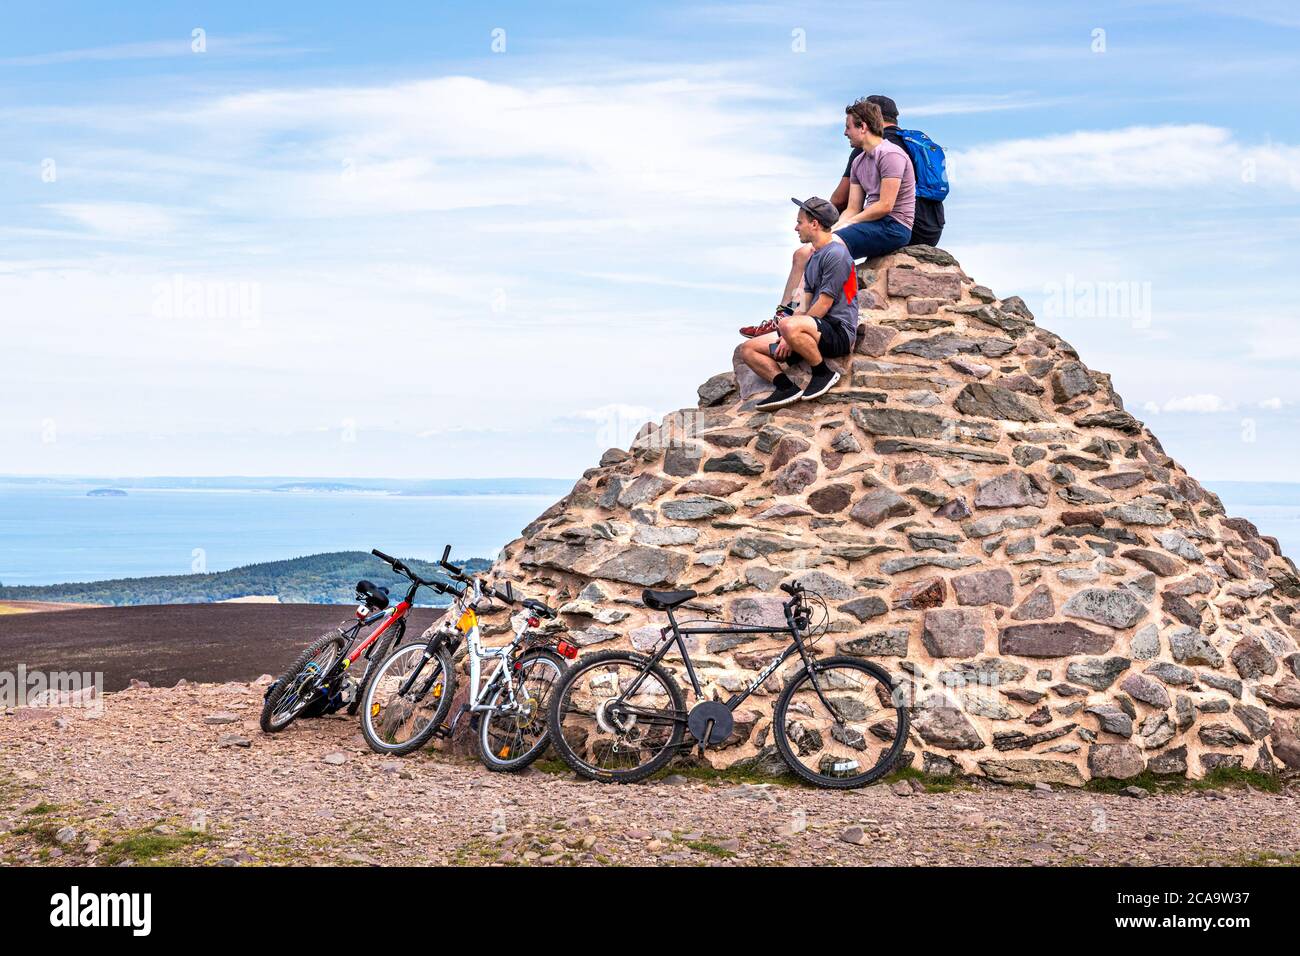 Exmoor National Park - Mountain bikers enjoying the view from the cairn marking the highest point on Exmoor, Dunkery Beacon 1705 feet 520 metres, Some Stock Photo